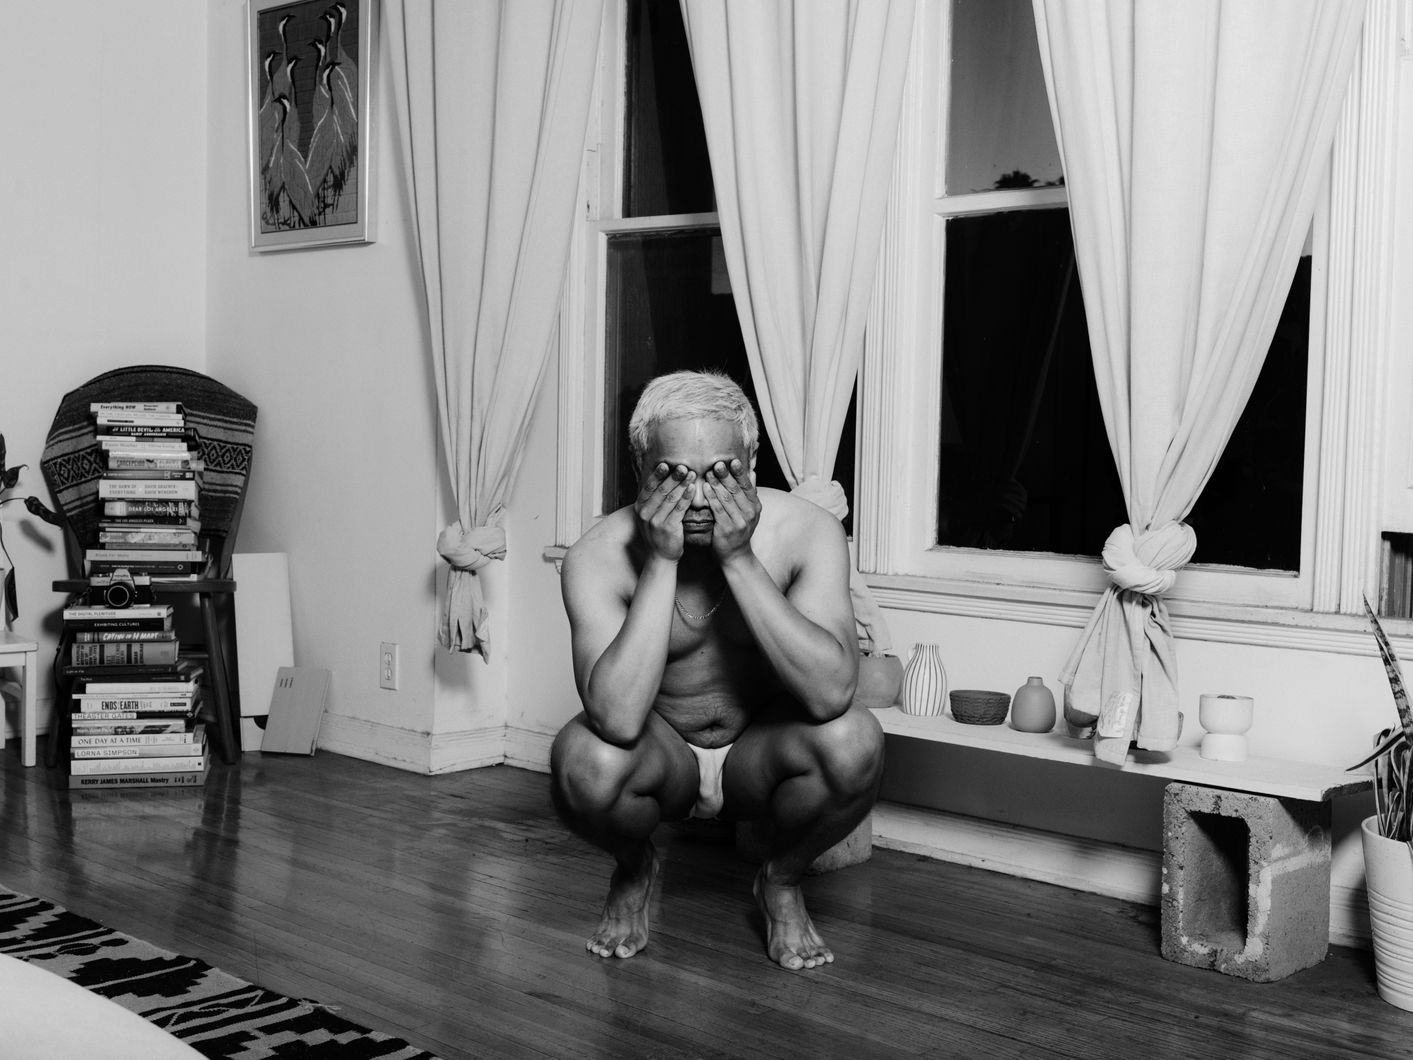 Black and white image of a person squatting in a living room. The person is wearing white underwear and a necklace, has bleached hair and covers their eyes with their hands. In the background, there are two windows with tied up curtains, a pile of books, some pottery and a painting. © Ricardo Nagaoka